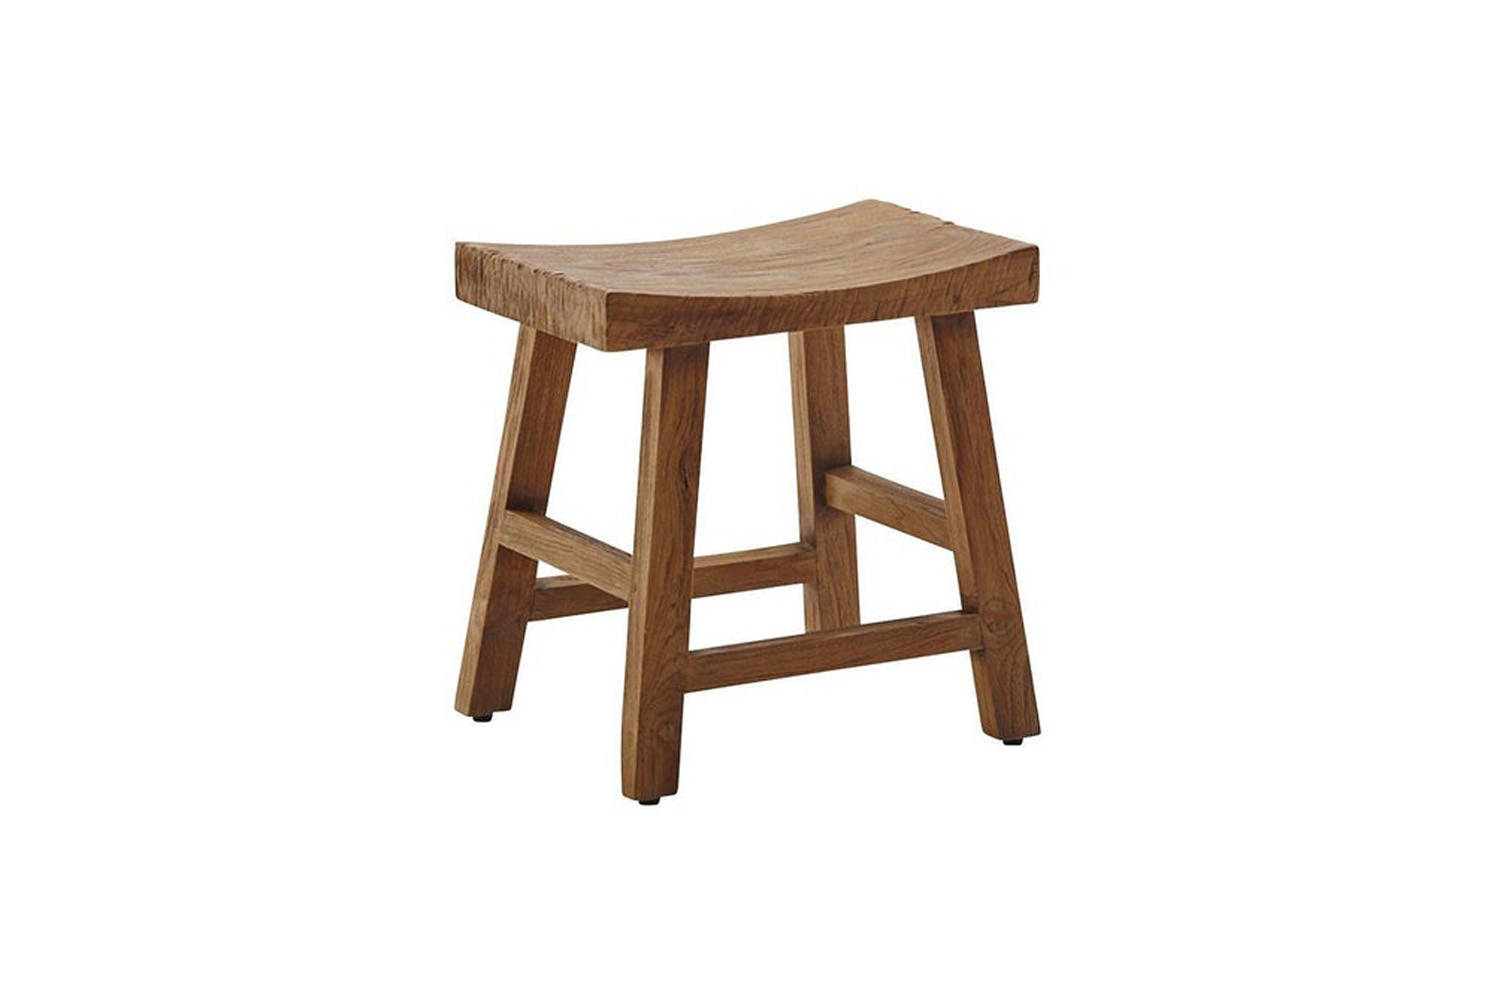 the sika design charles dining stool is \$435 at danish design store. 16